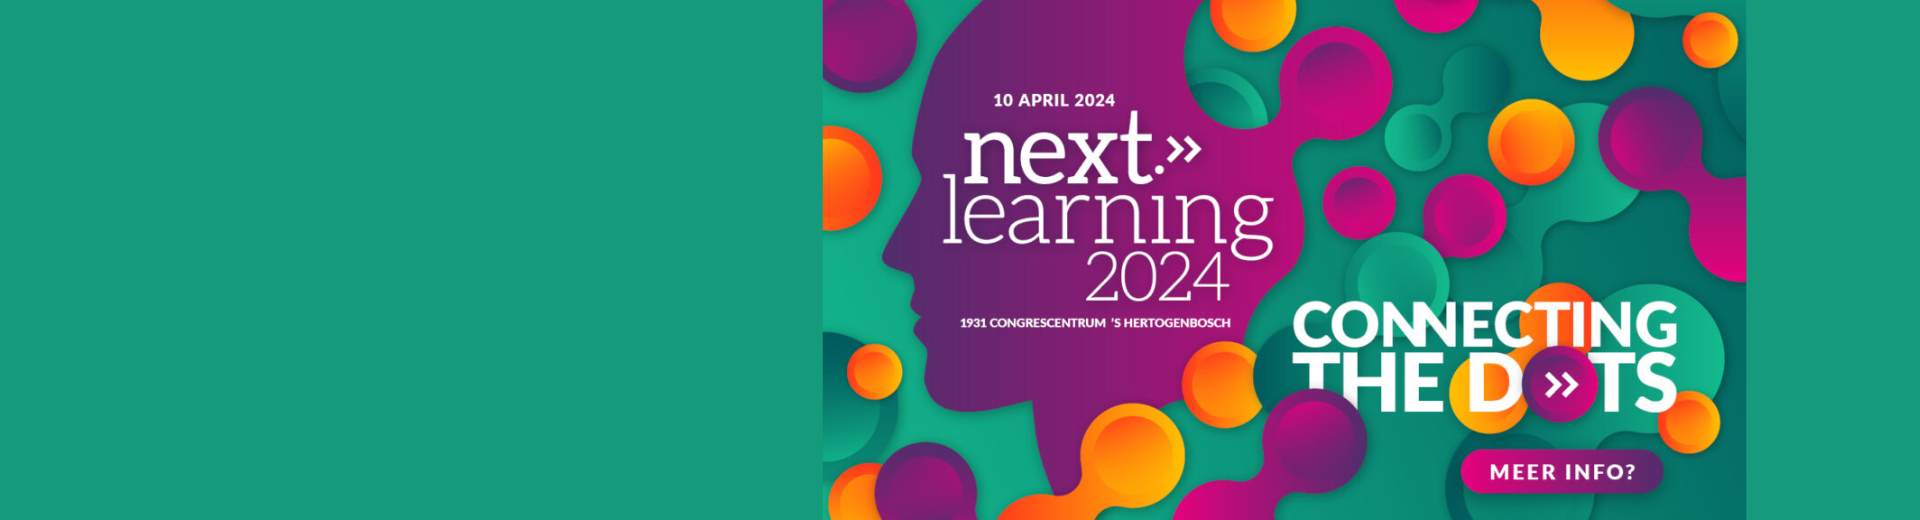 Next Learning NL 2024